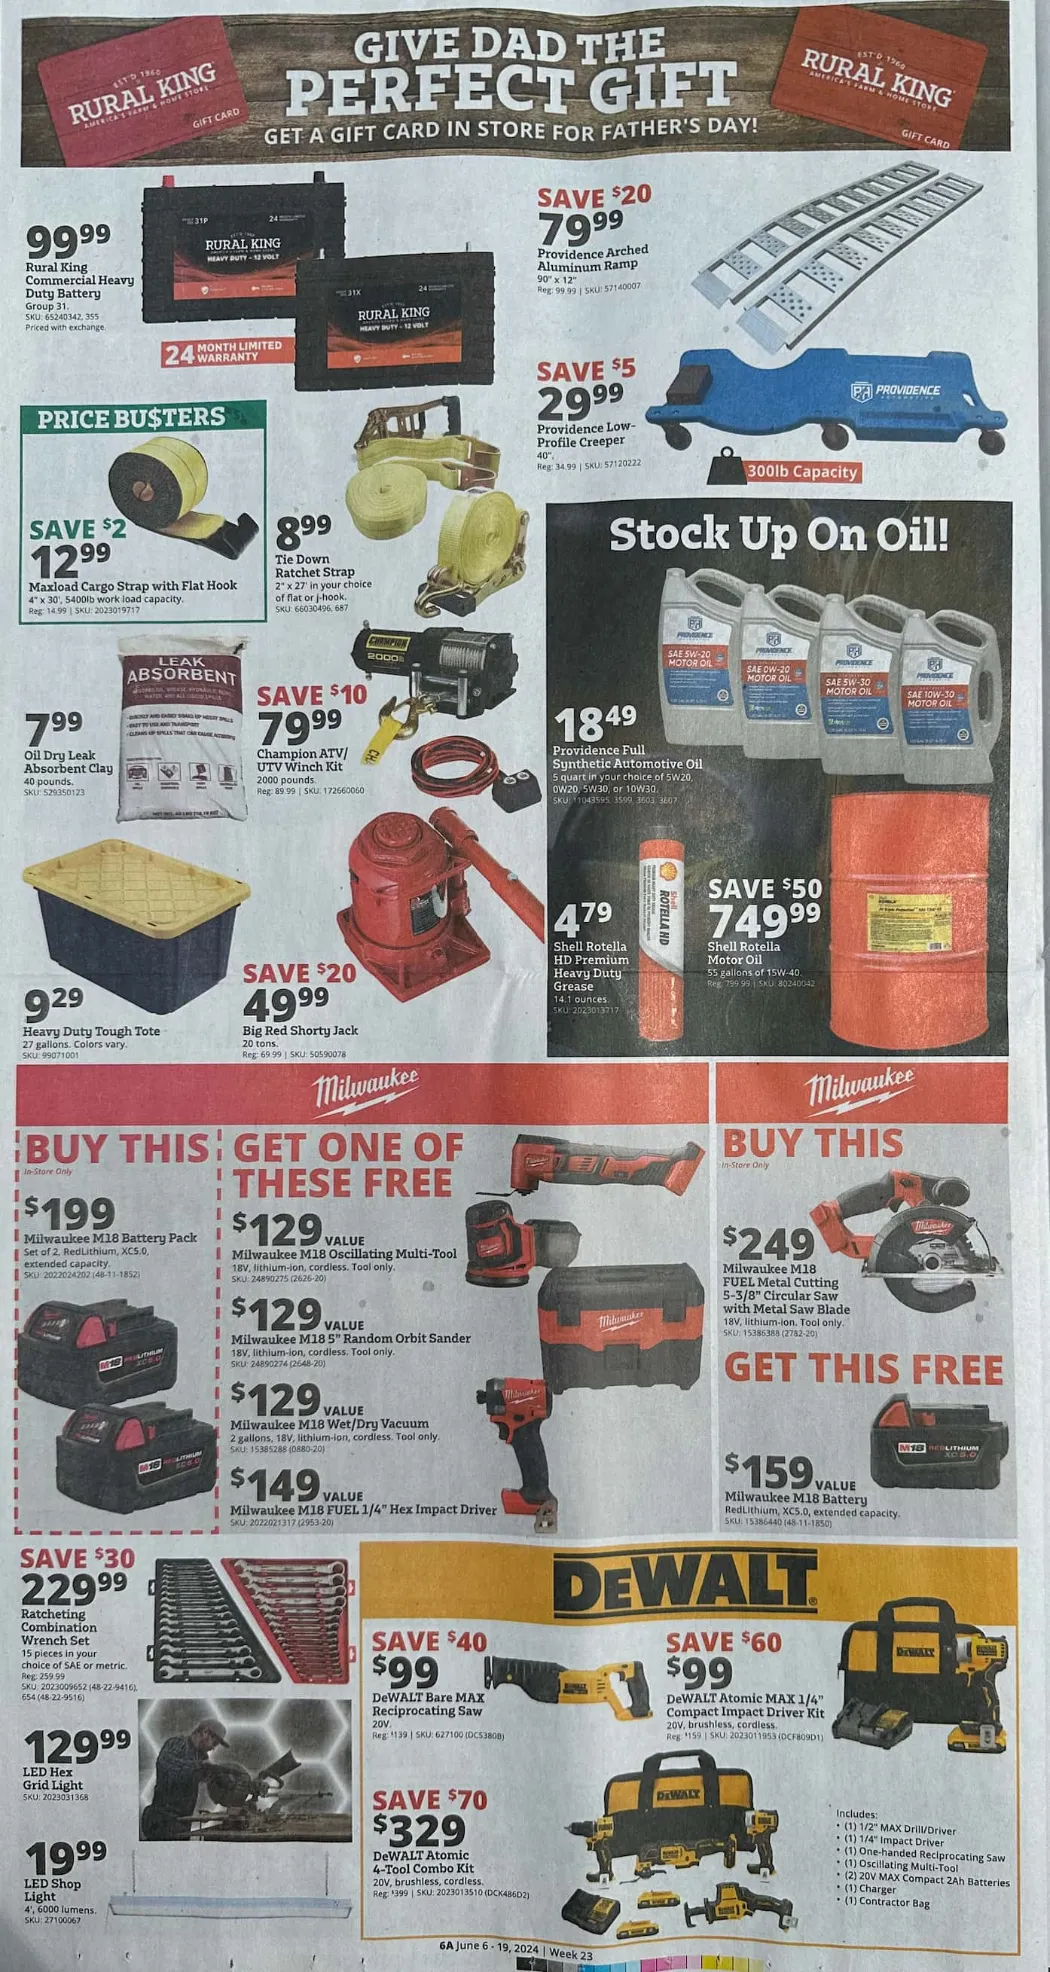 Rural King Weekly Ad July 2024 Weekly Sales, Deals, Discounts and Digital Coupons.